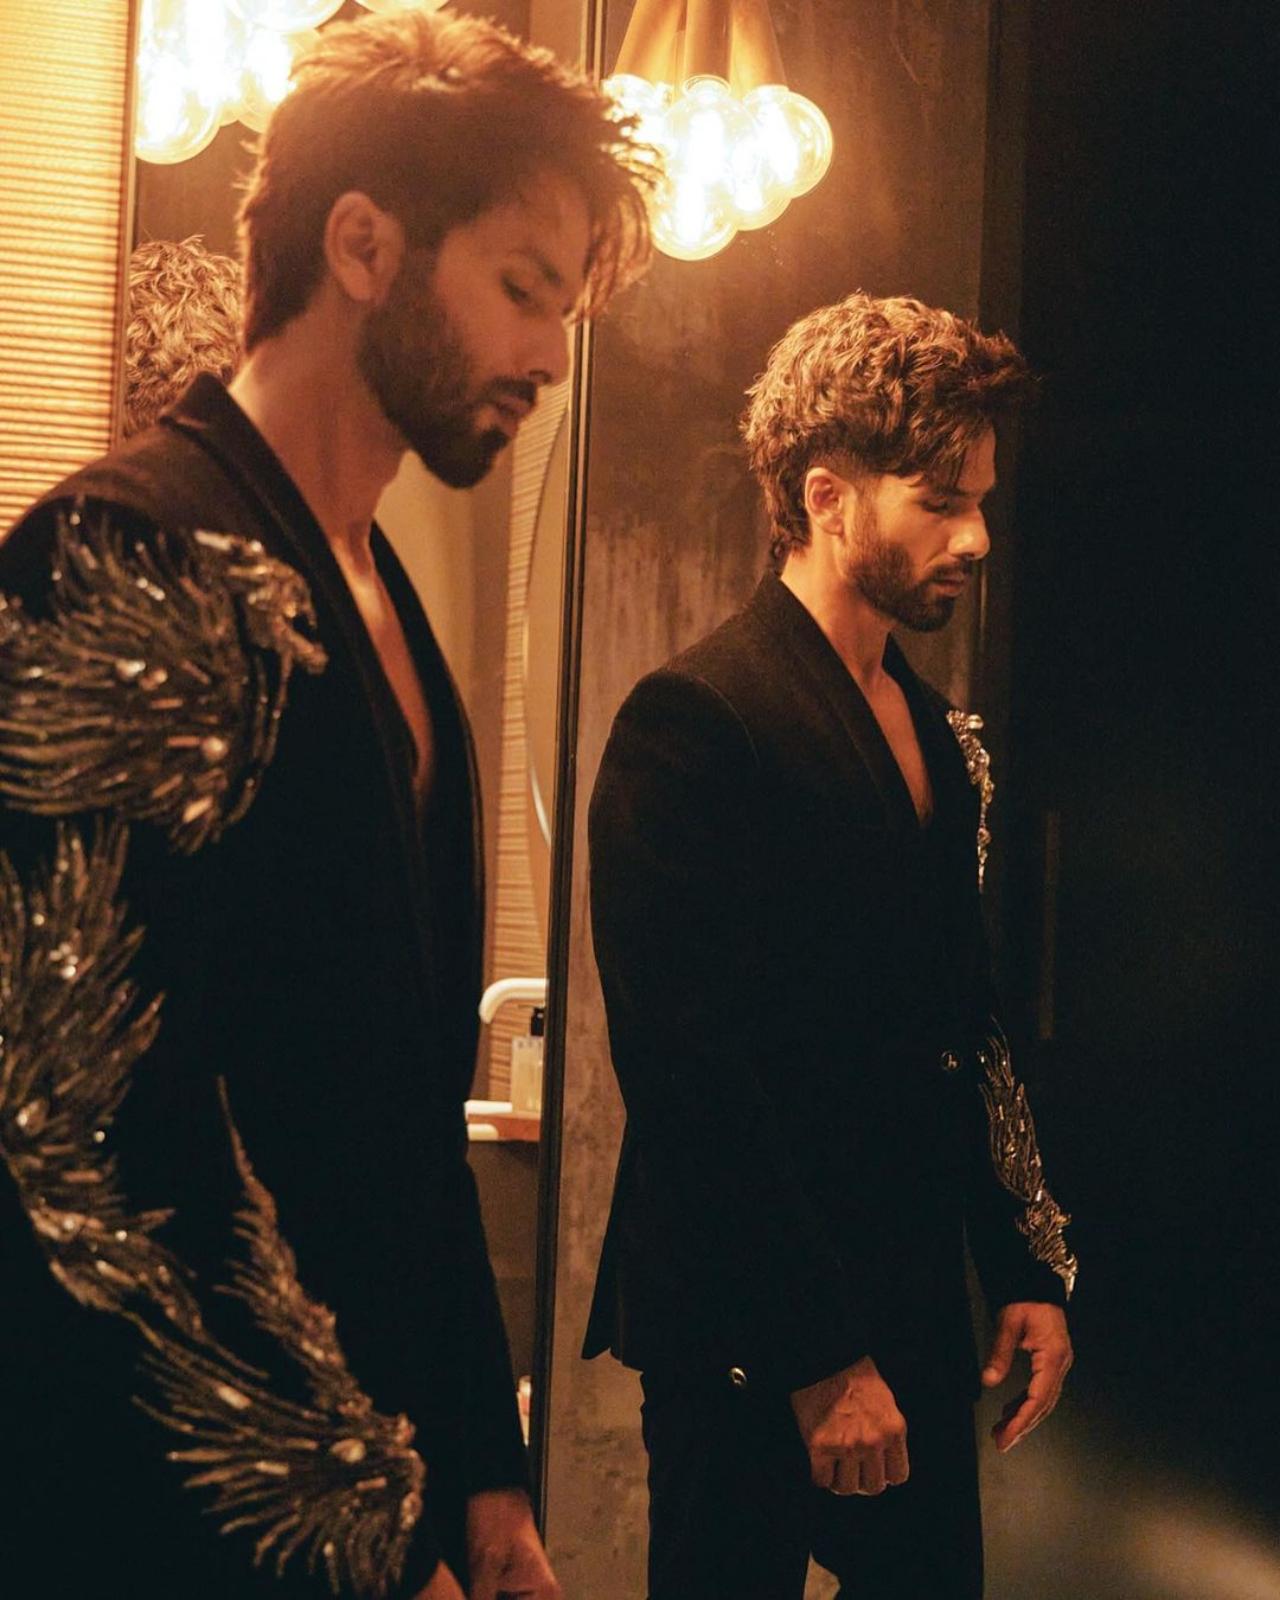 Bollywood actor Shahid Kapoor is not just known for his prominent roles as an actor, but also his swoon-worthy fashion sense. Recently, Kapoor took to his Instagram feed and shared some sizzling photos of his dapper outfit. In the caption, he wrote, 